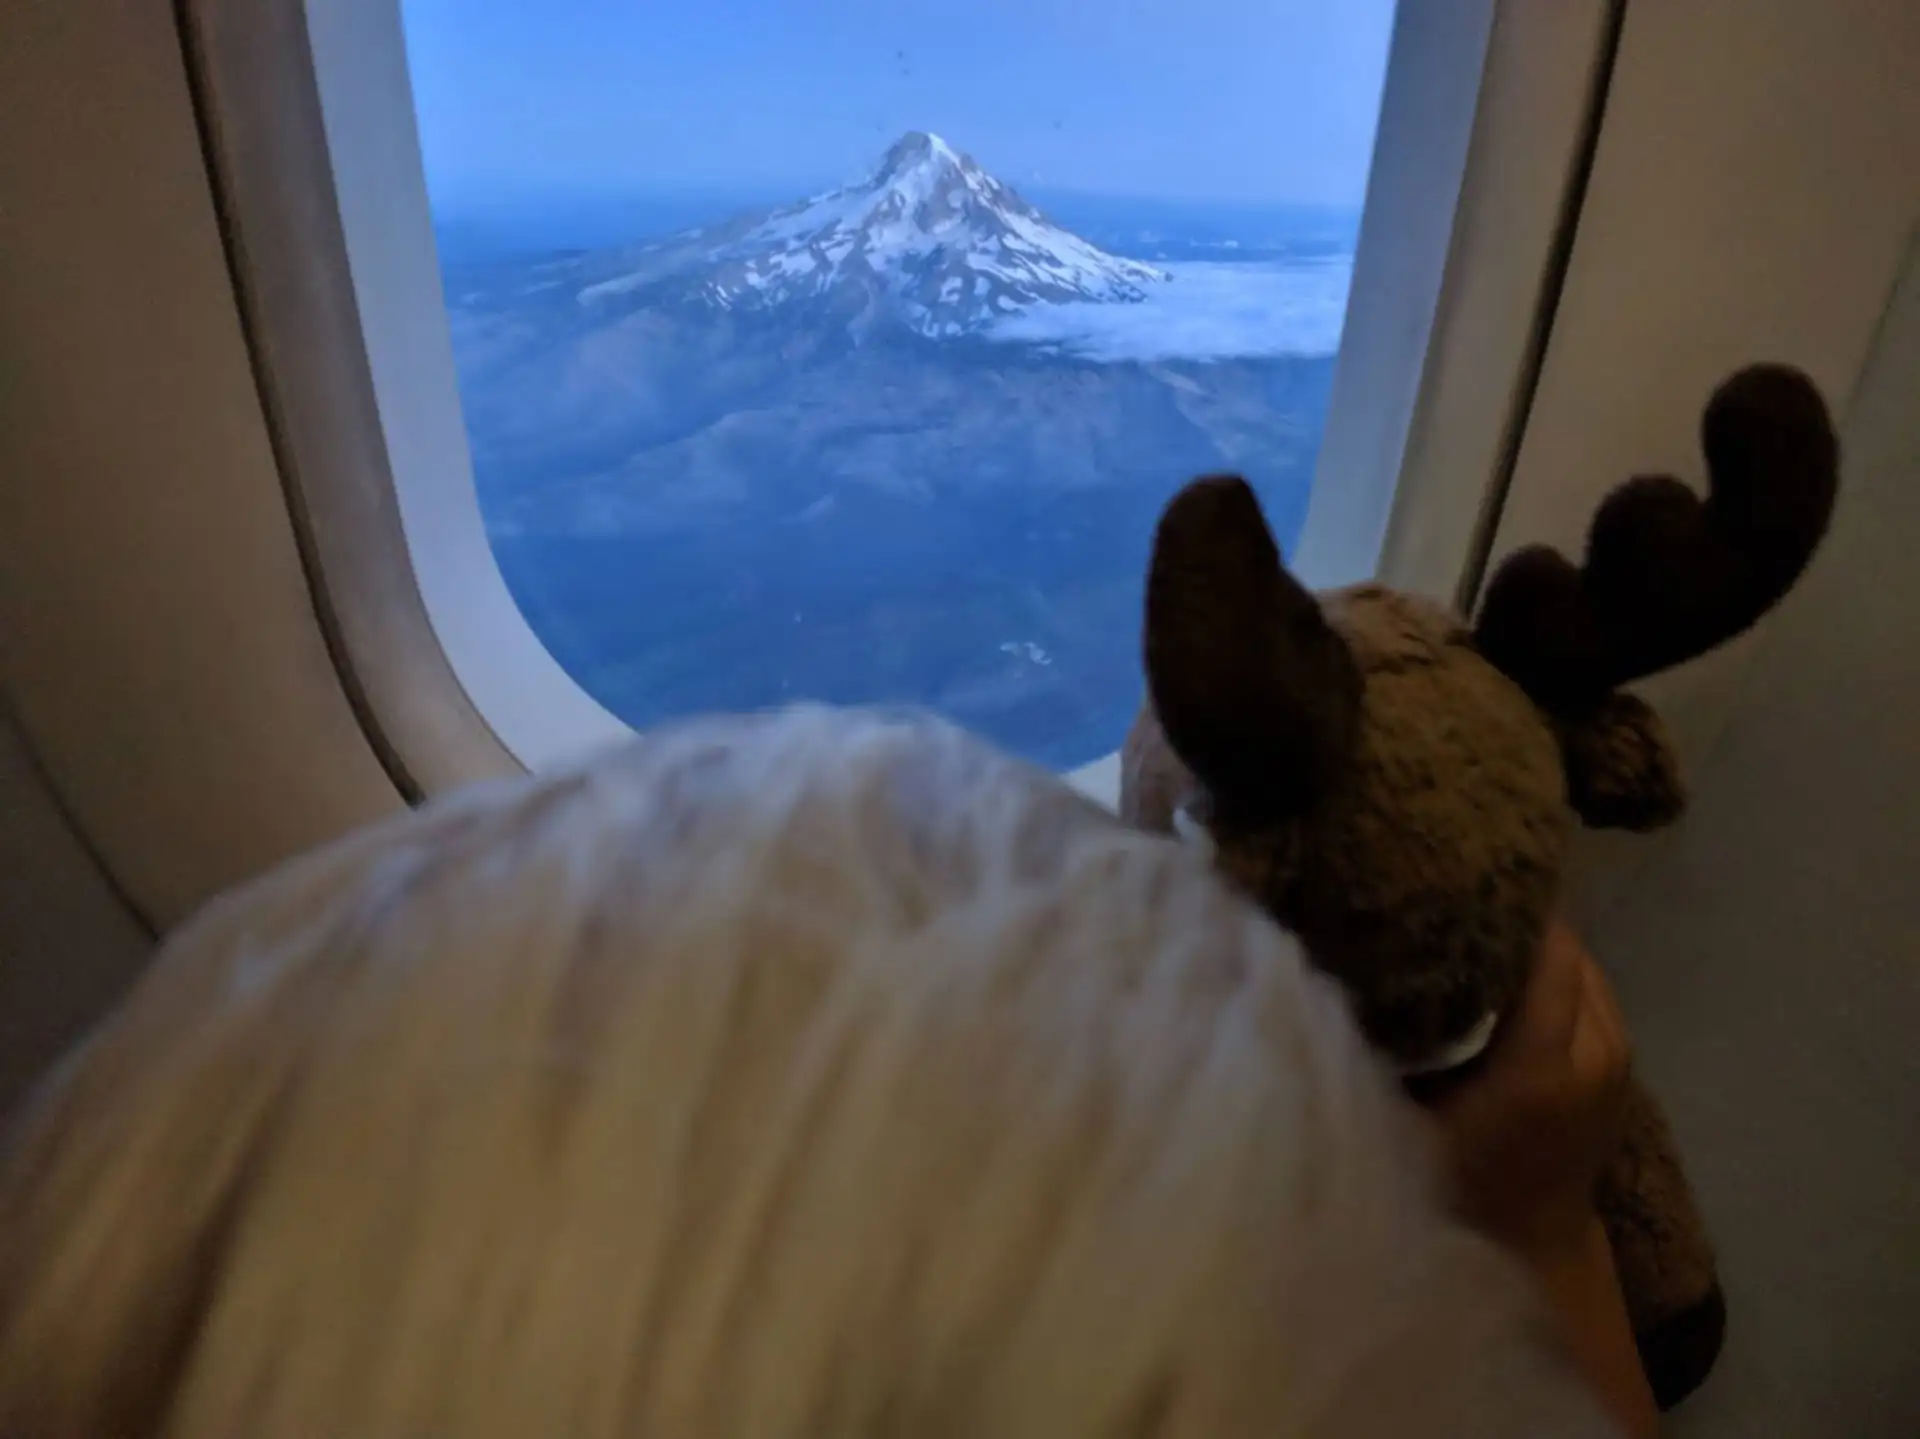 Child looking out airplane window at mountain